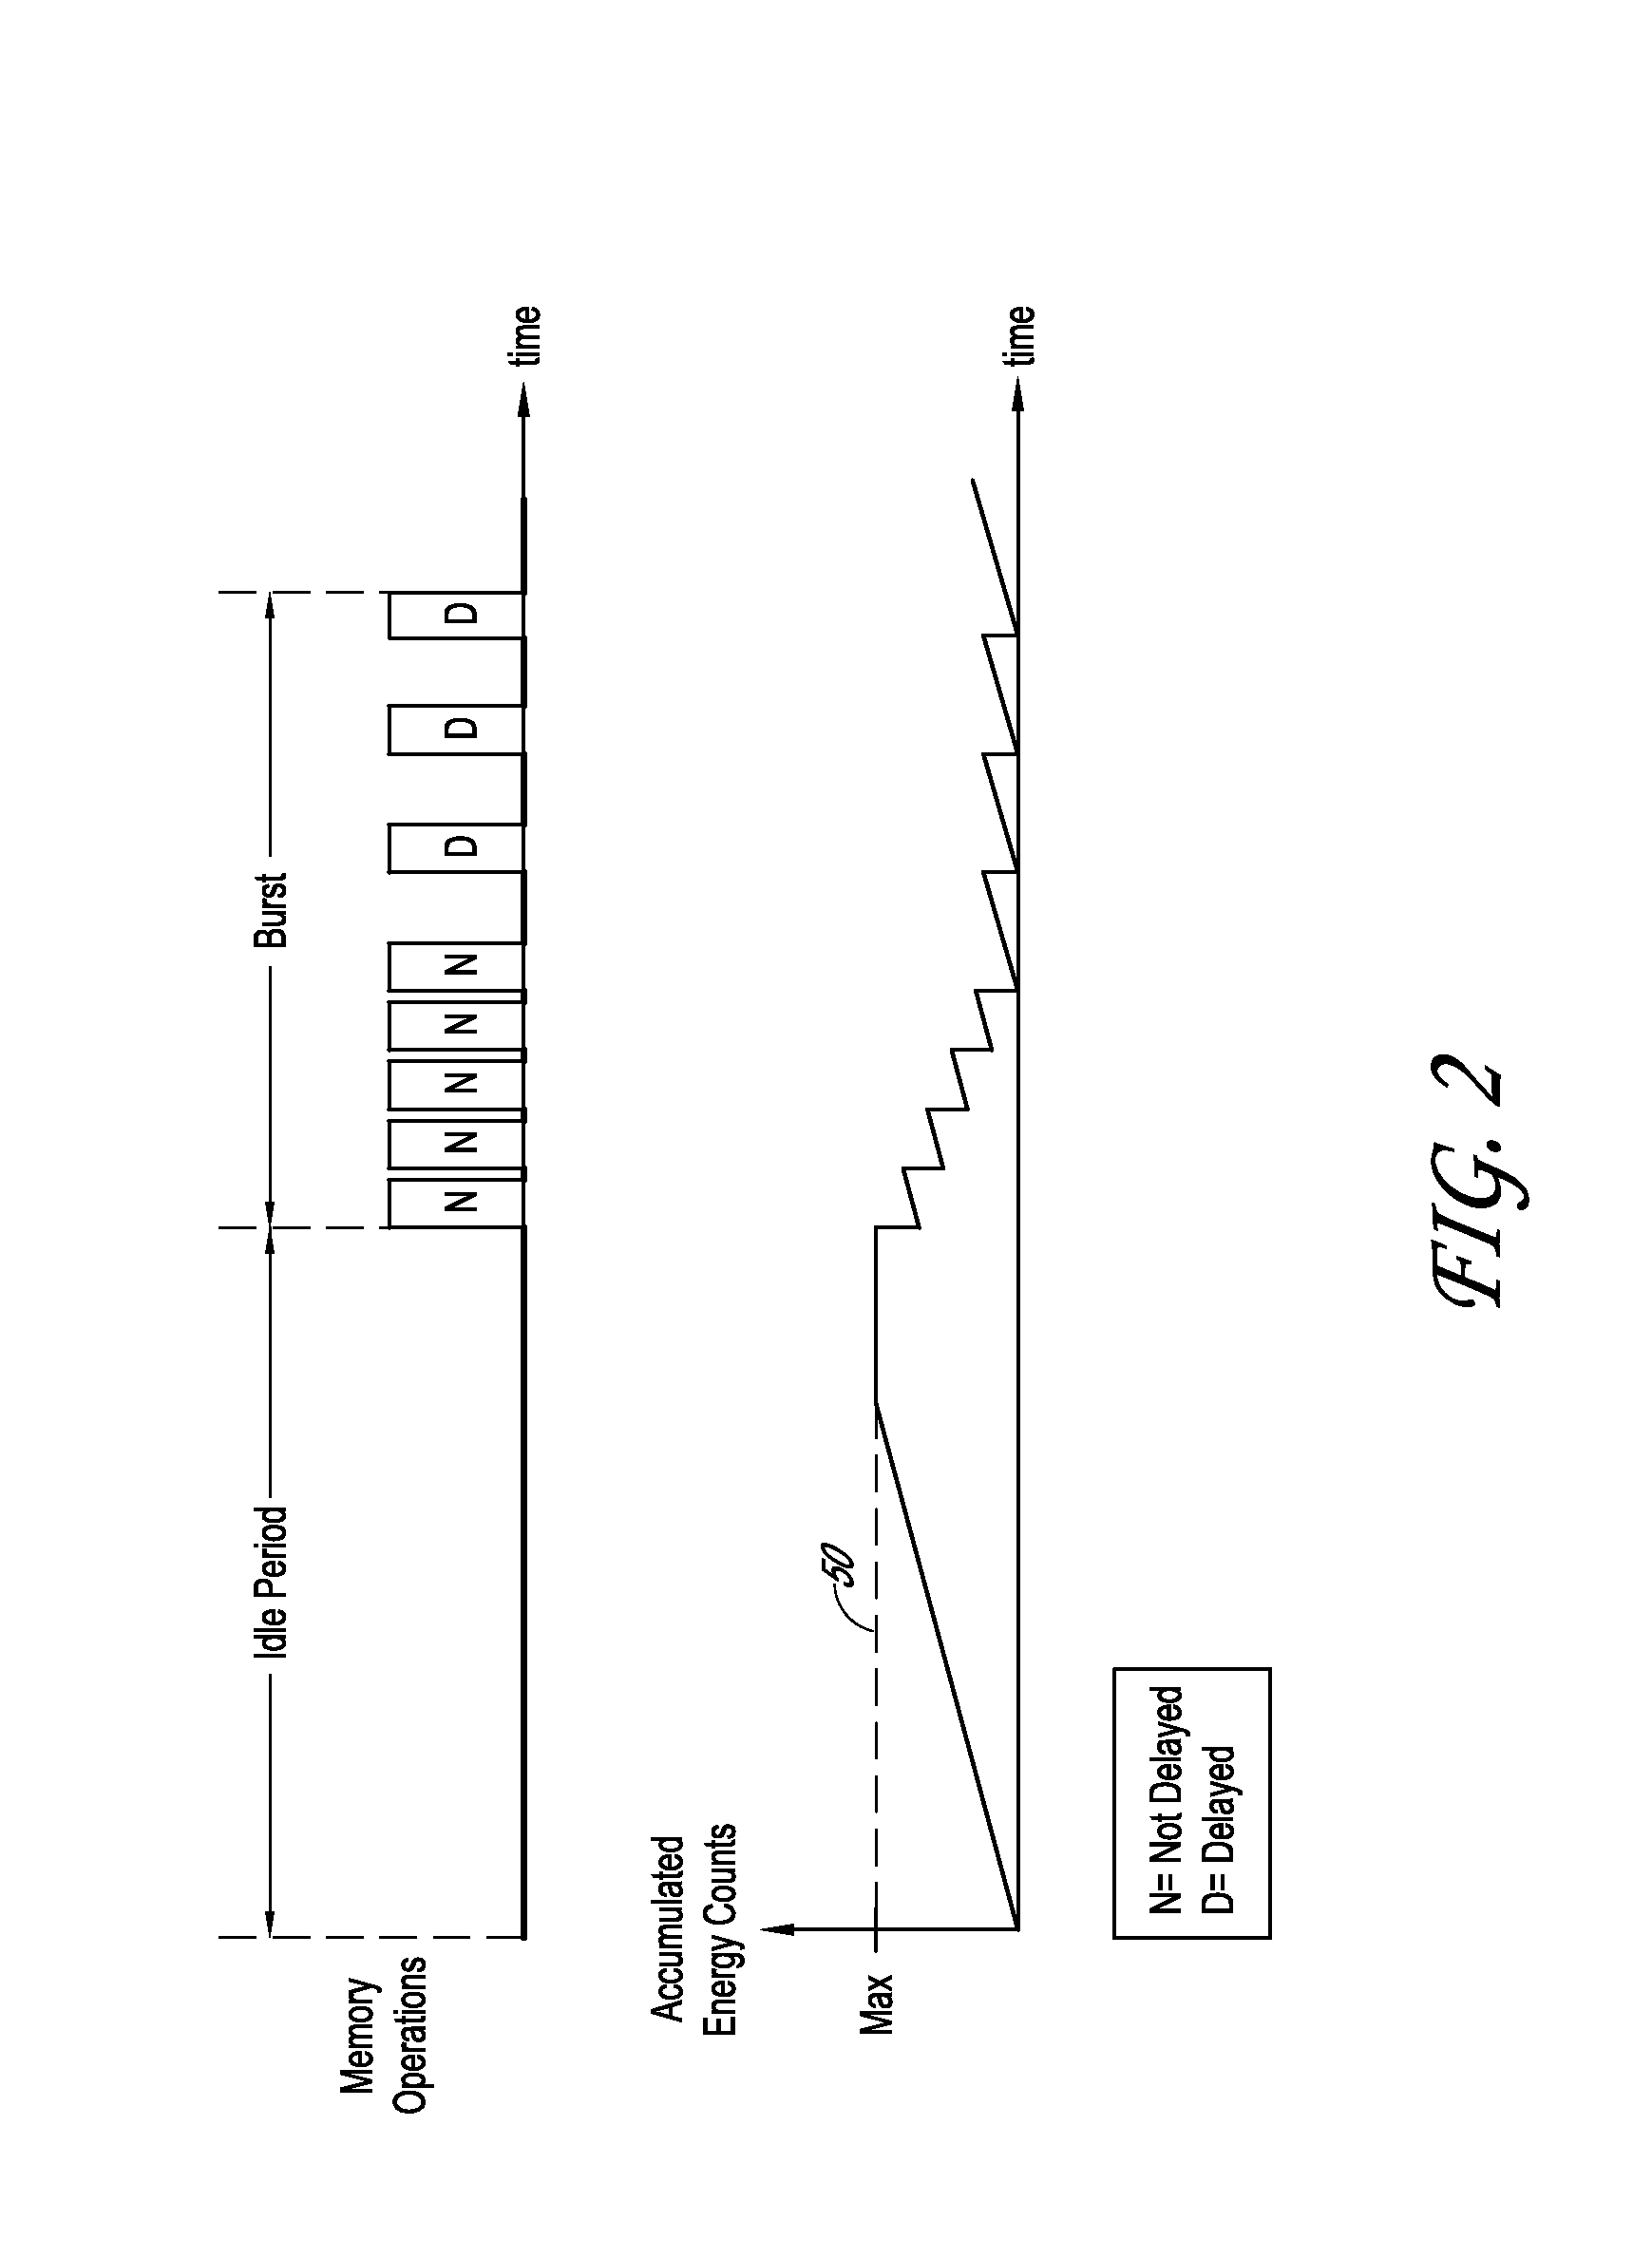 Non-volatile storage subsystem with energy-based performance throttling